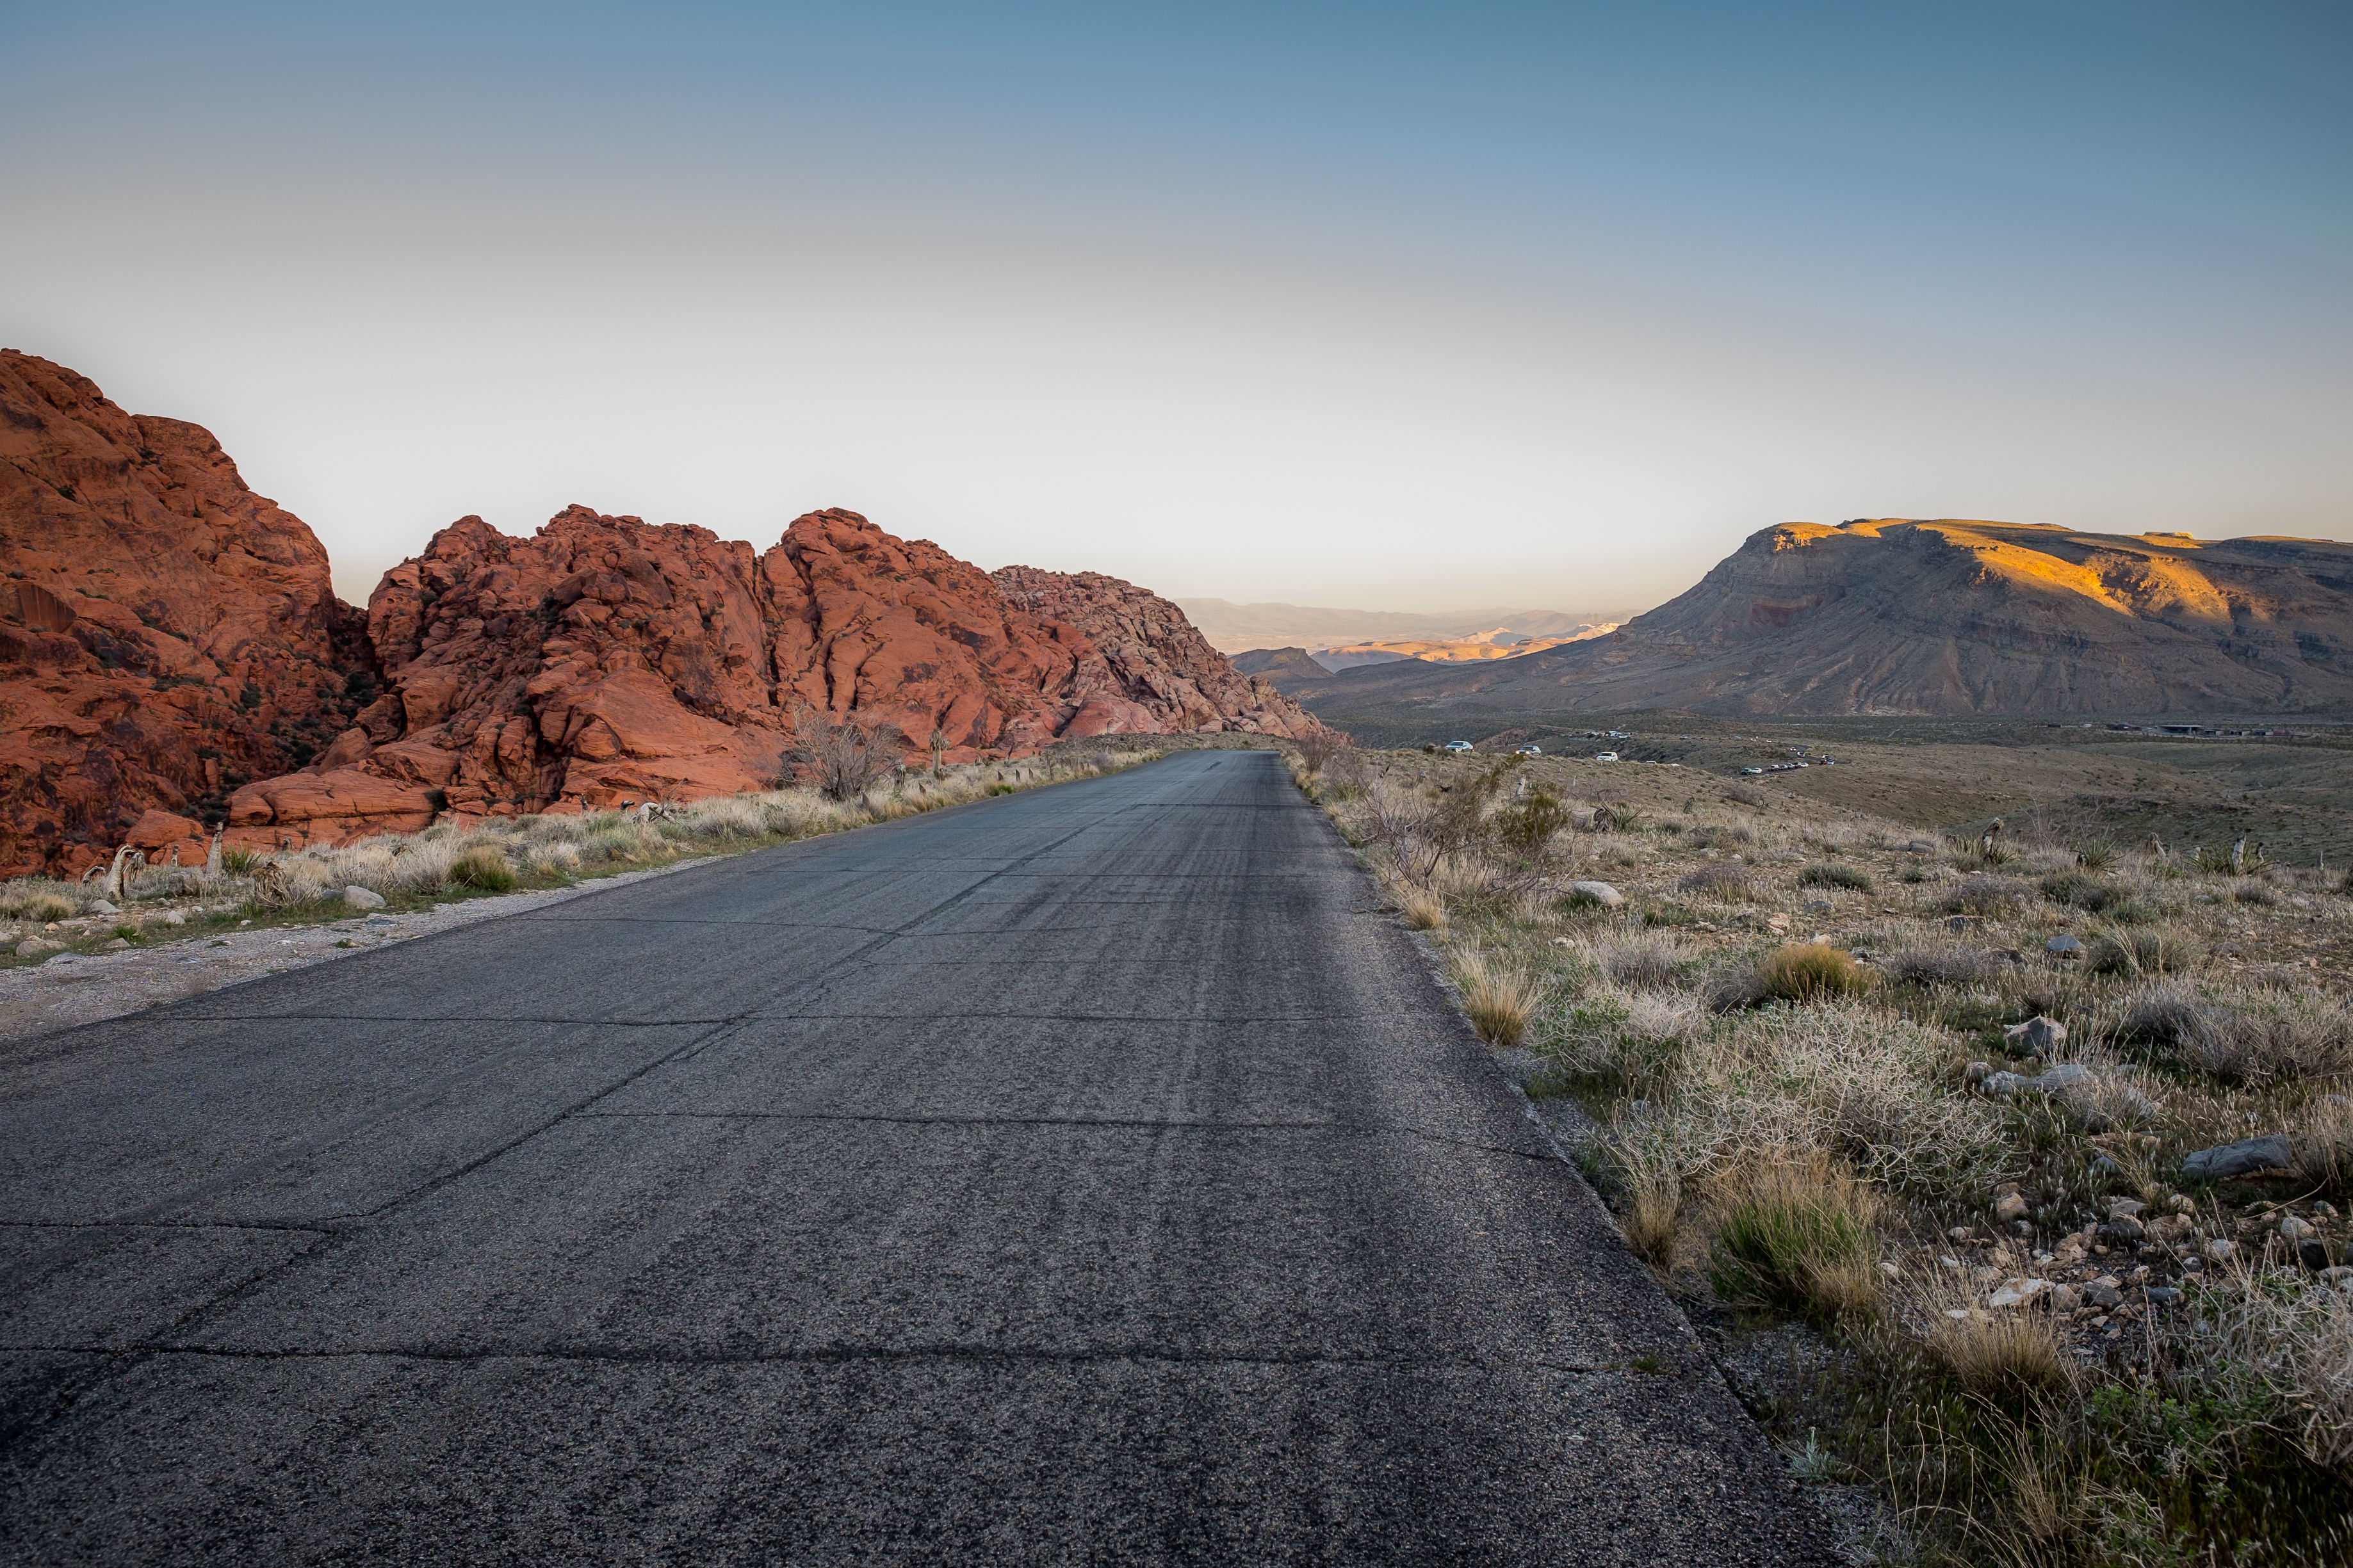 A deserted paved road in America.